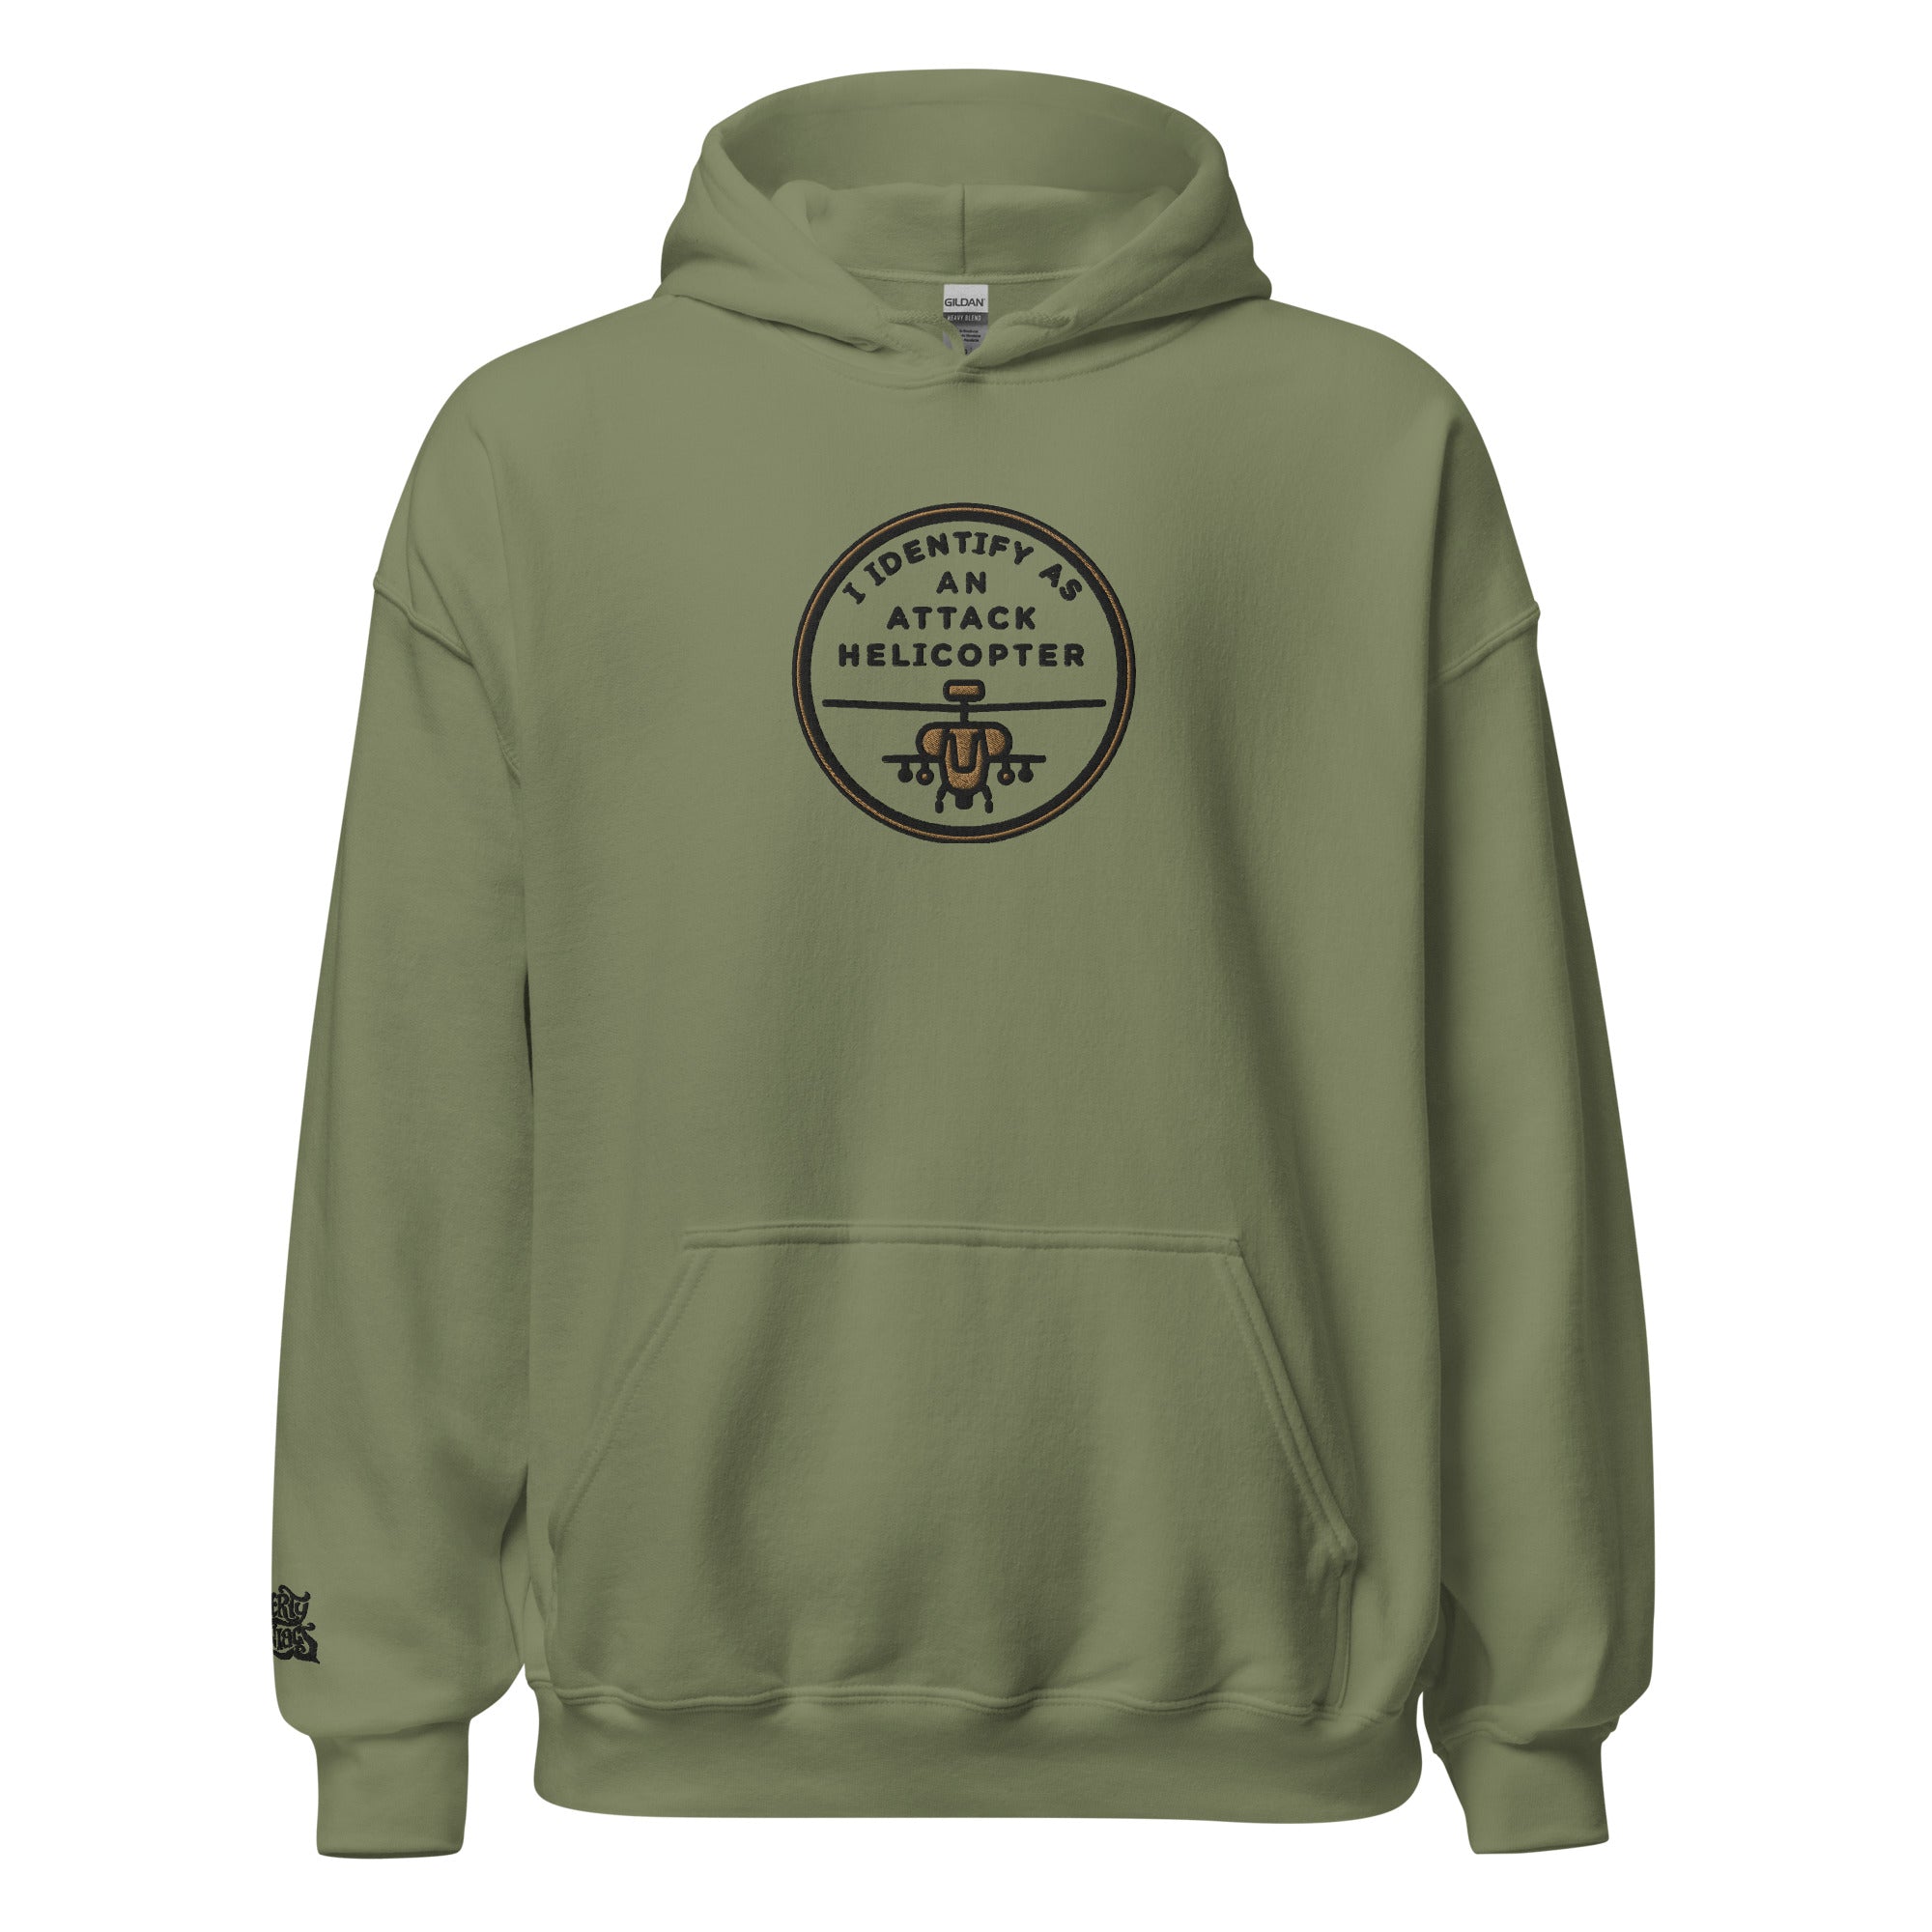 I Identify as an Attack Helicopter Embroidered Hoodie